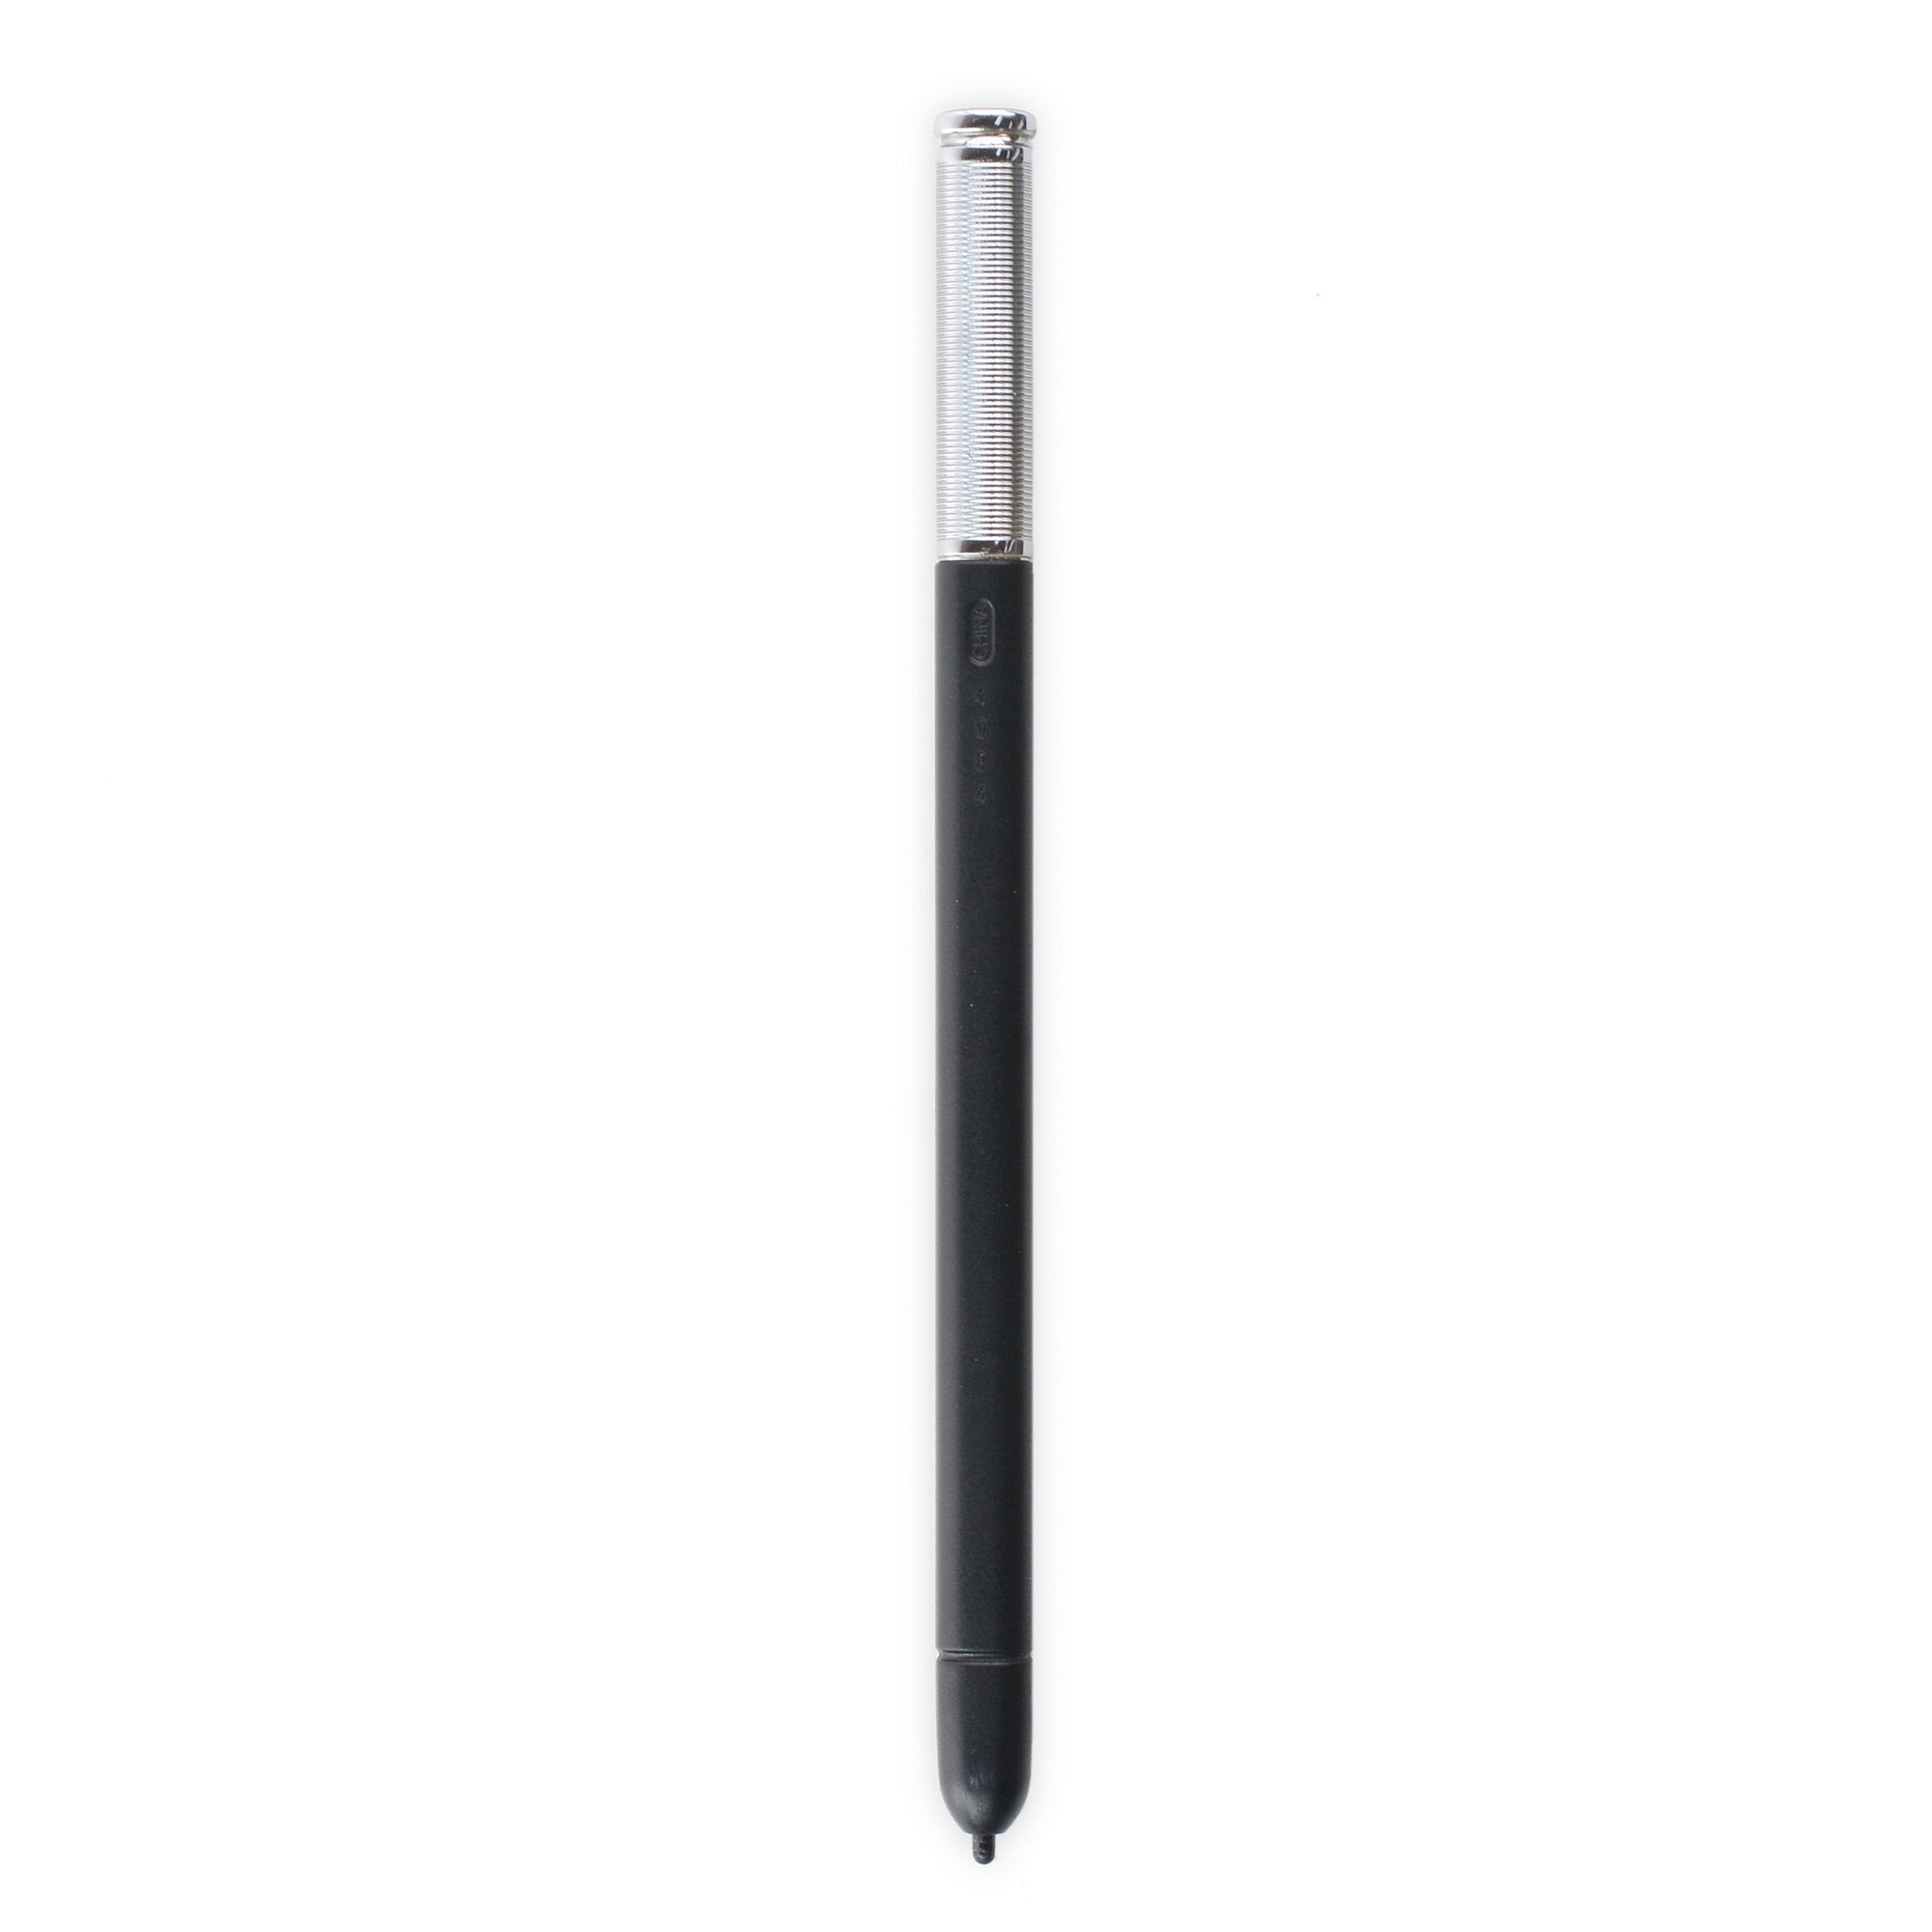 Galaxy Note 10.1 (2014) Pen Black Used, A-Stock